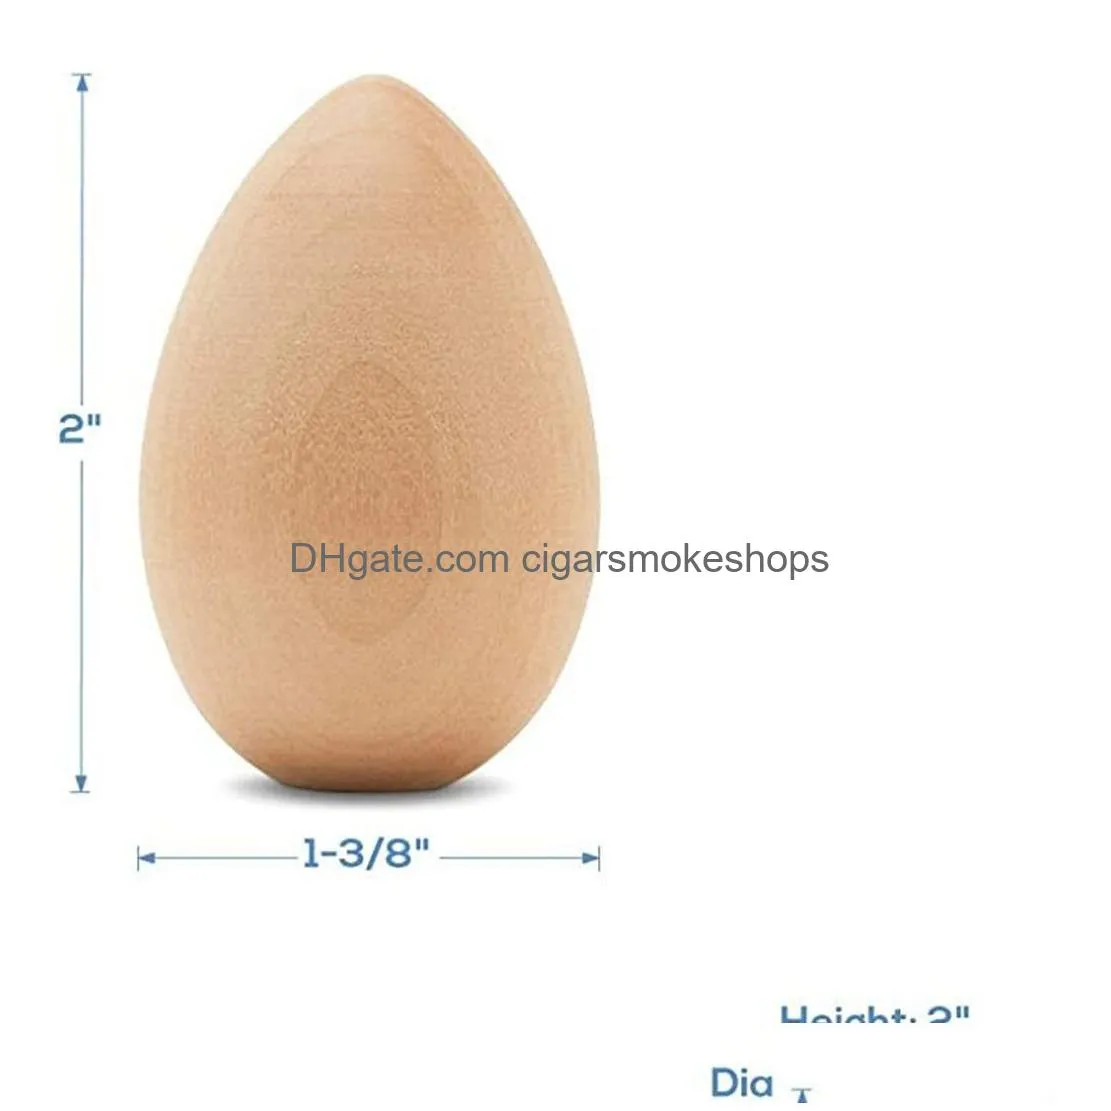 factory home decor smooth standable wooden easter eggs to paint quality small for crafts paint 2 in